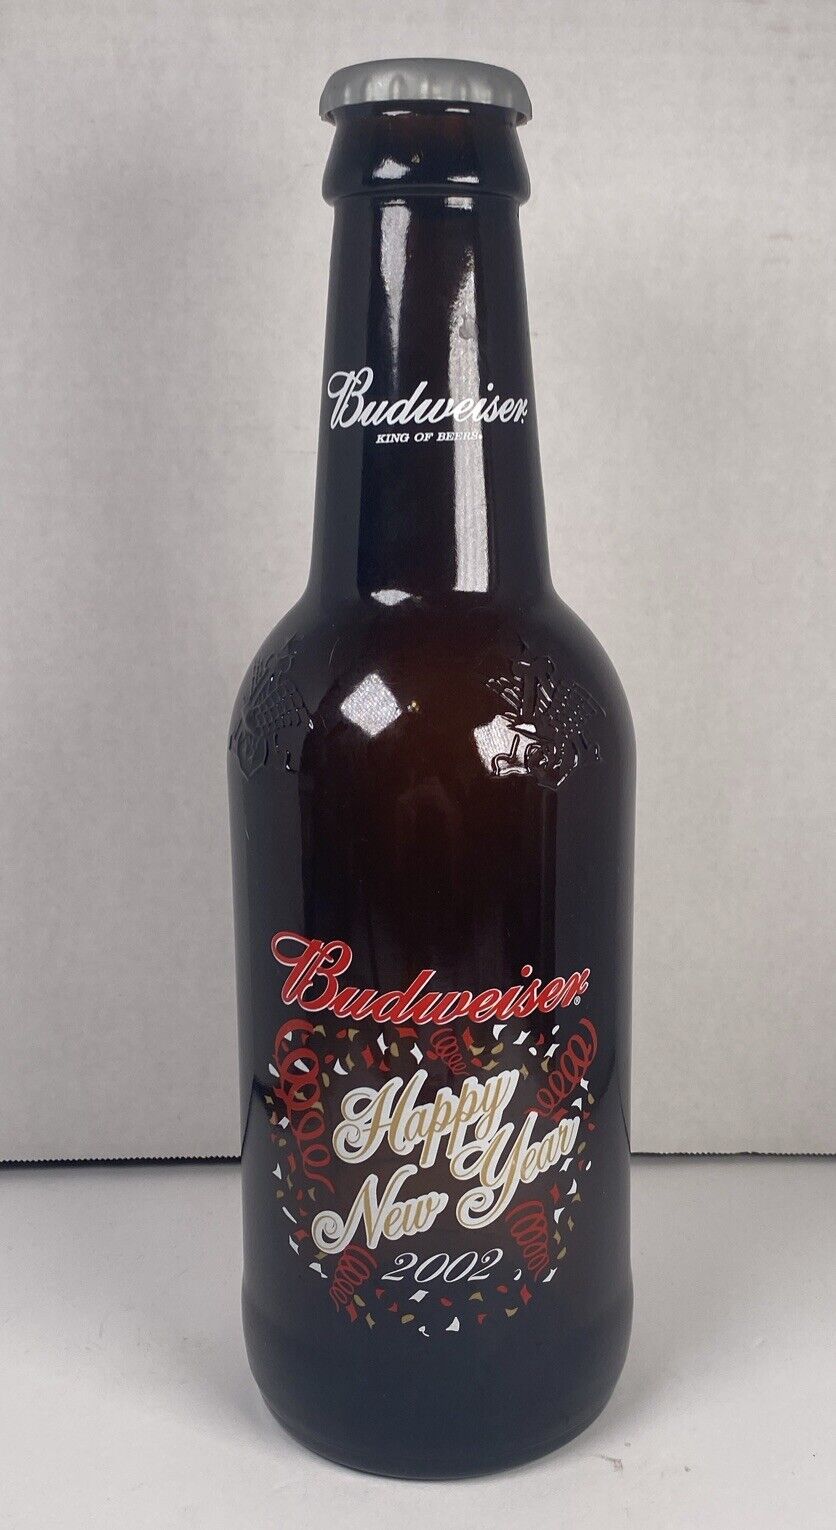 Budweiser King Pitcher - 2002 Happy New Year.  Large (15 inches) glass bottle